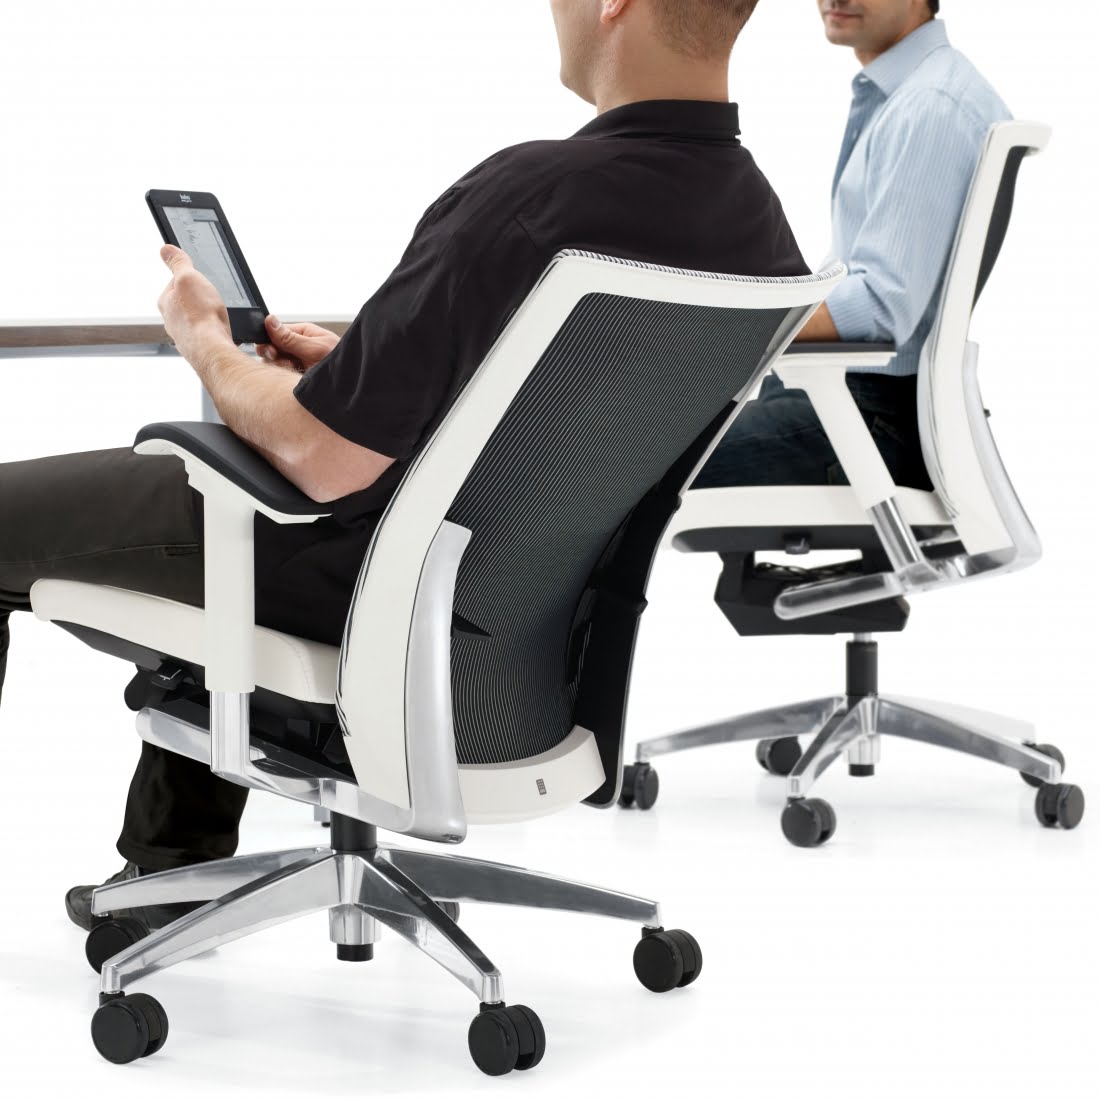 What Makes an Office Chair Ergonomic? | ROSI Office Systems, Inc